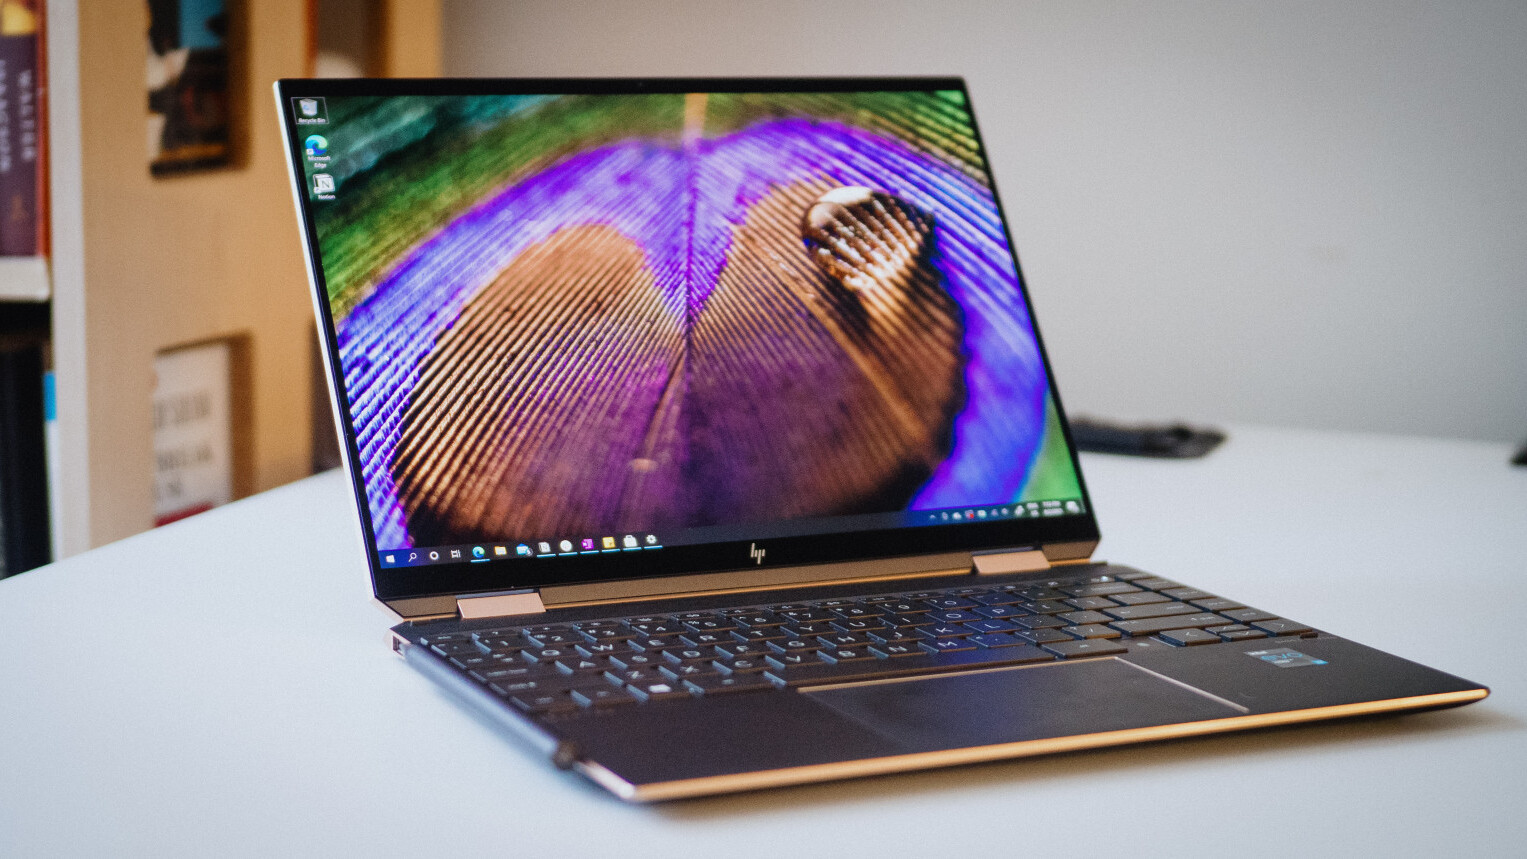 HP Spectre x360 14 review: SO close to the perfect Windows laptop